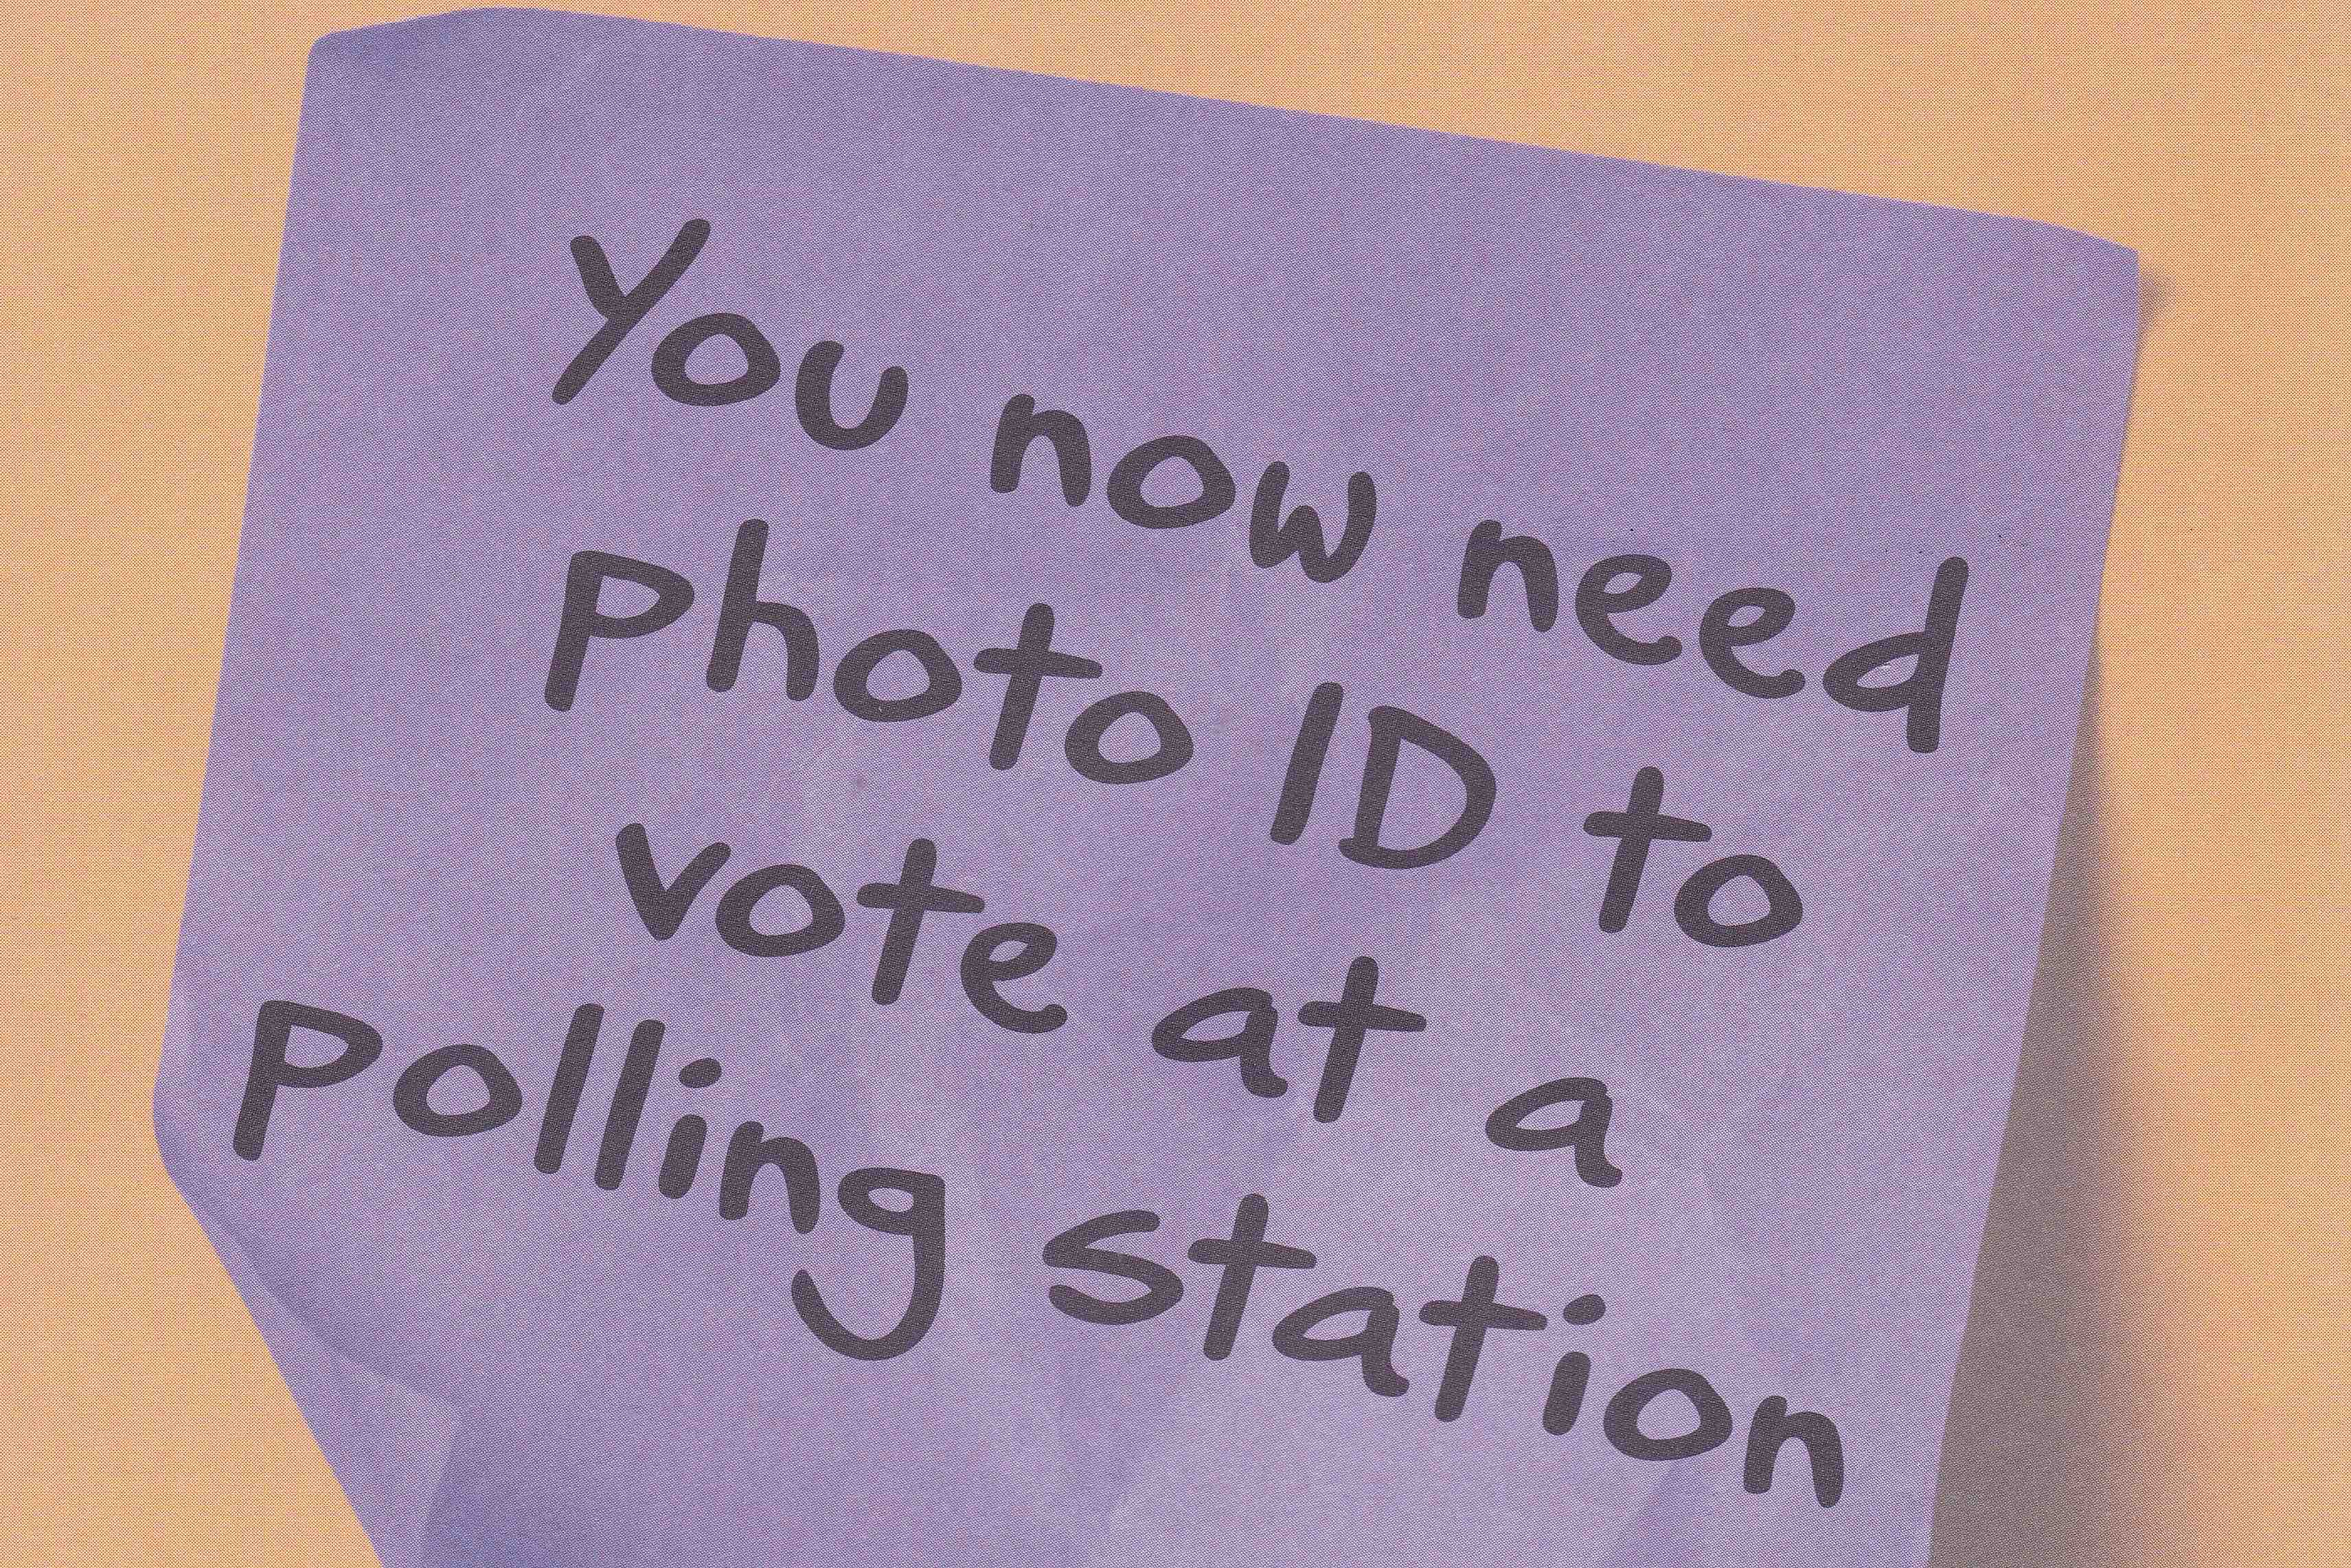 Voter IDs needed at the Polling Station